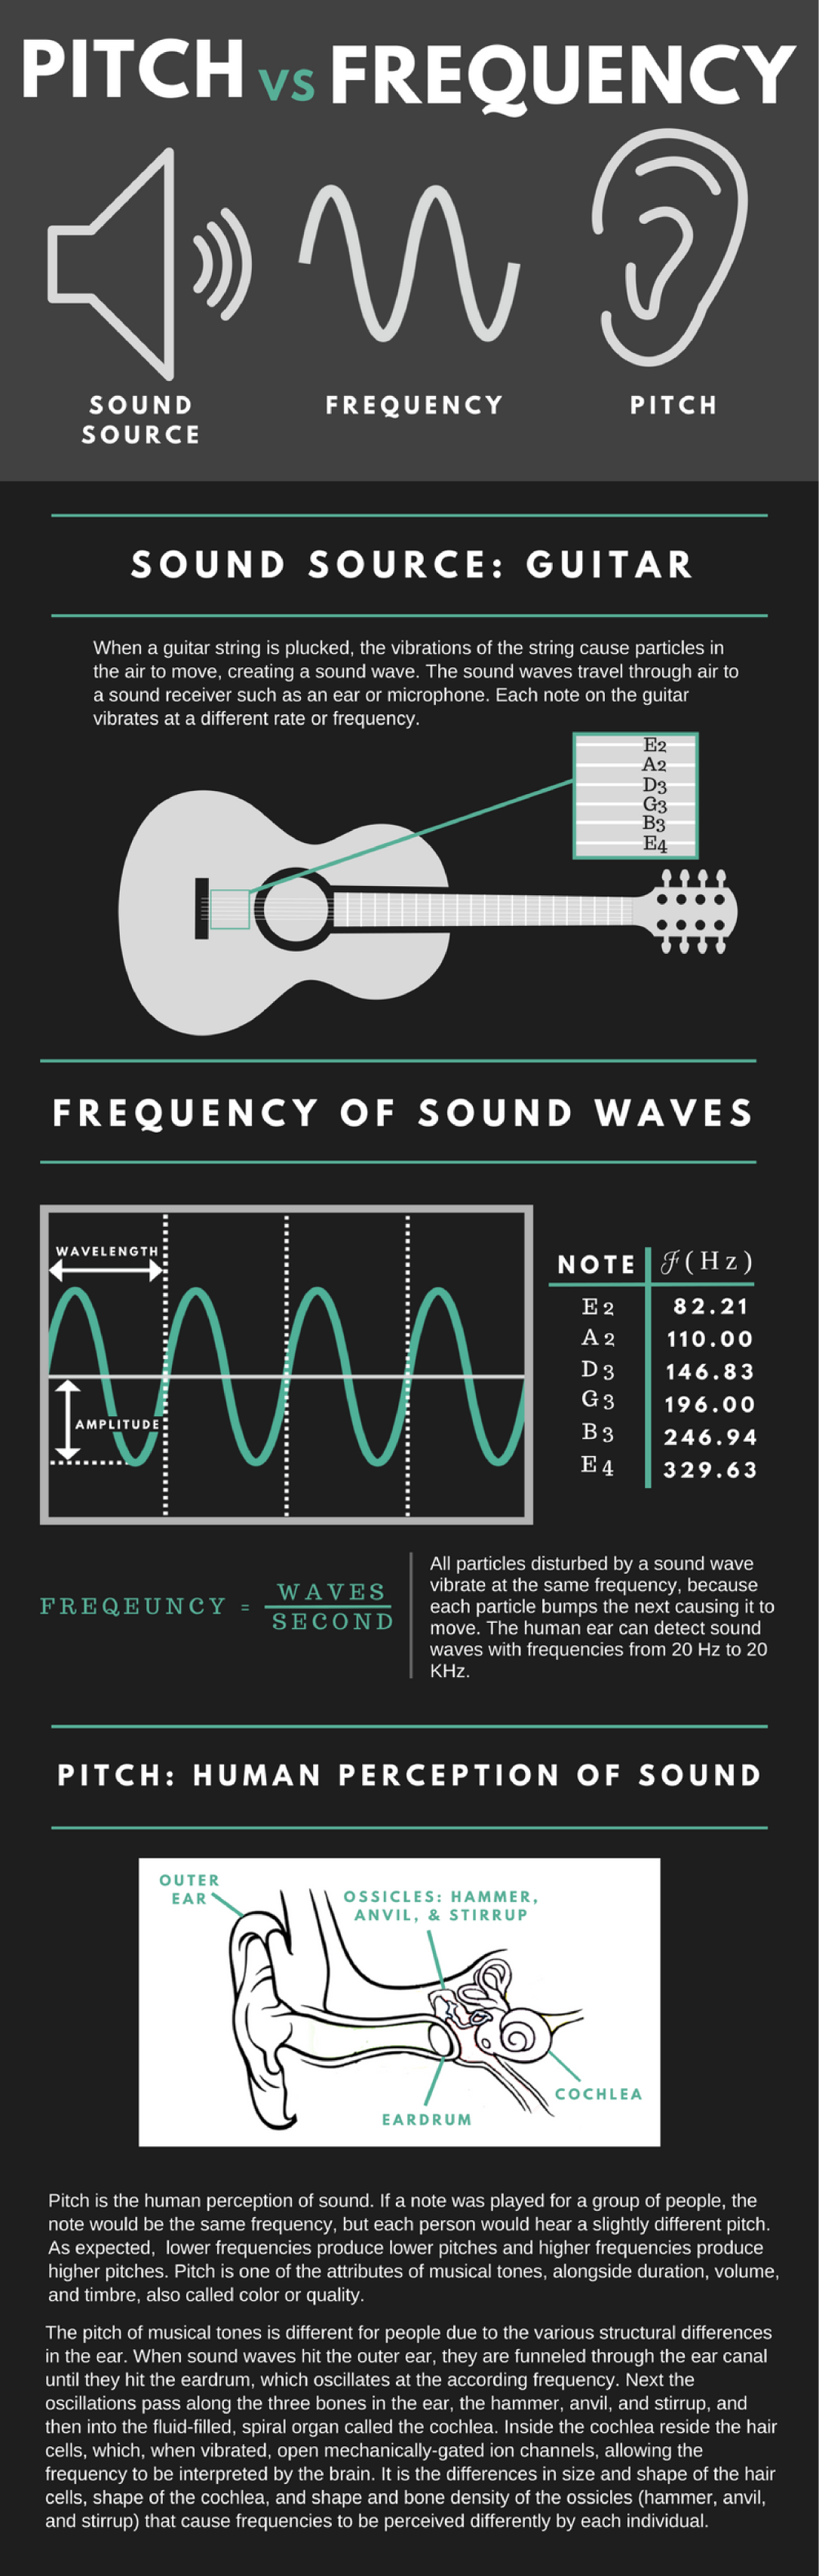 Pitch verses frequency